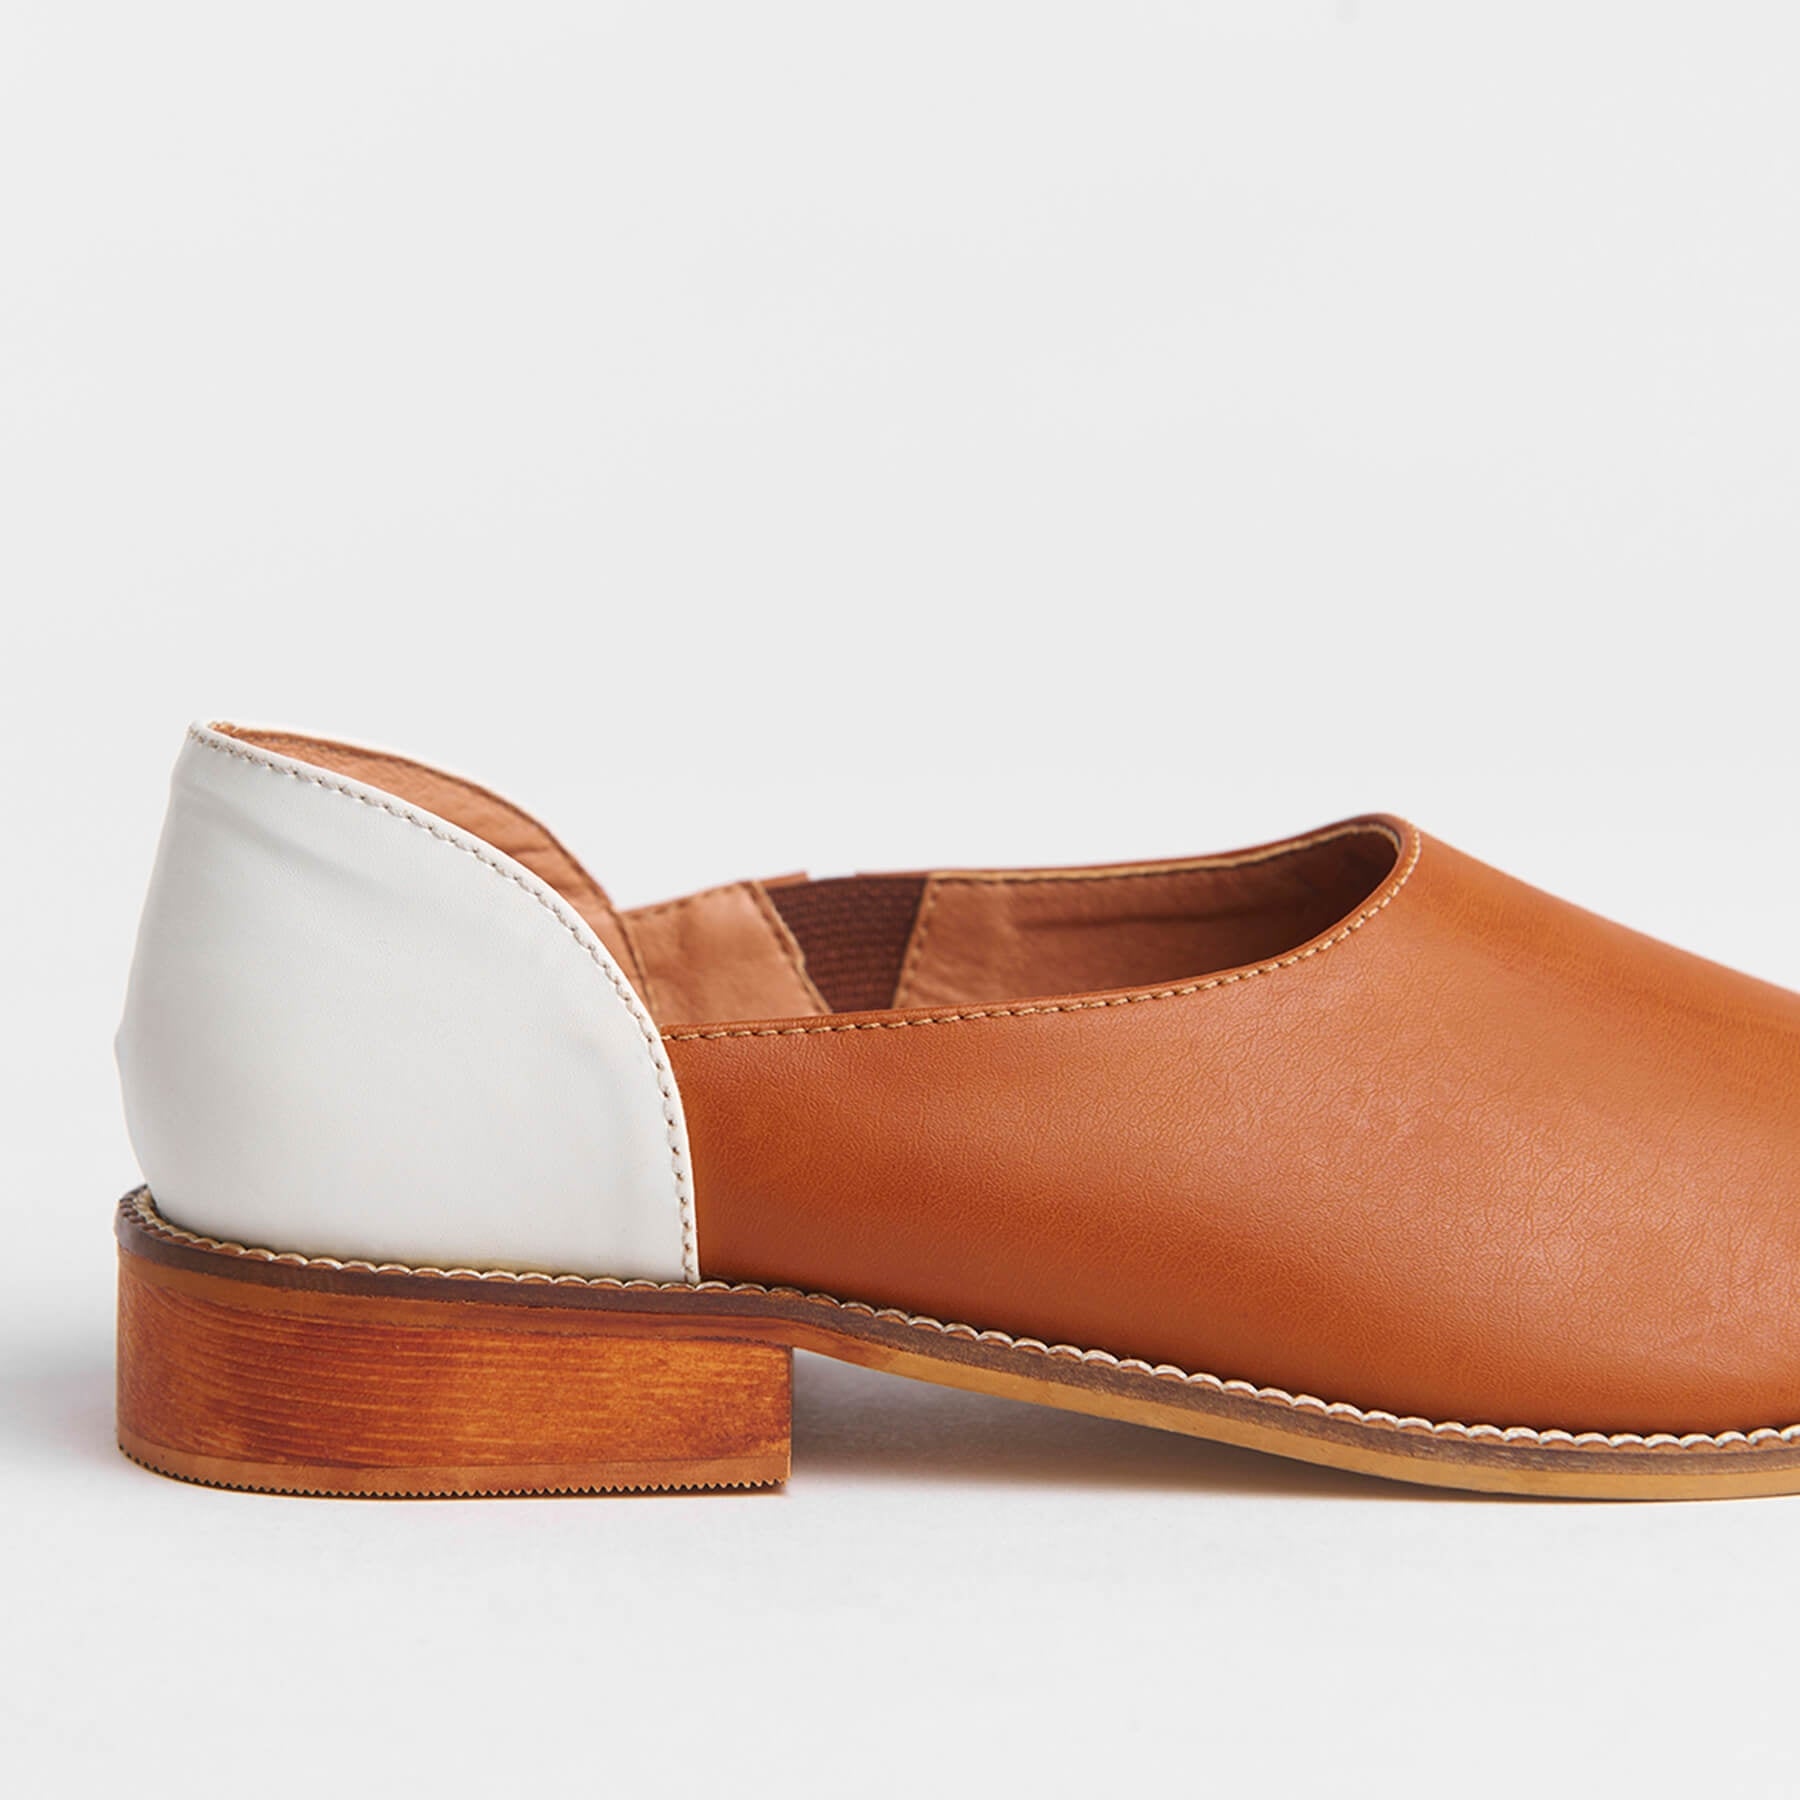 Tan & White Pointed Loafers